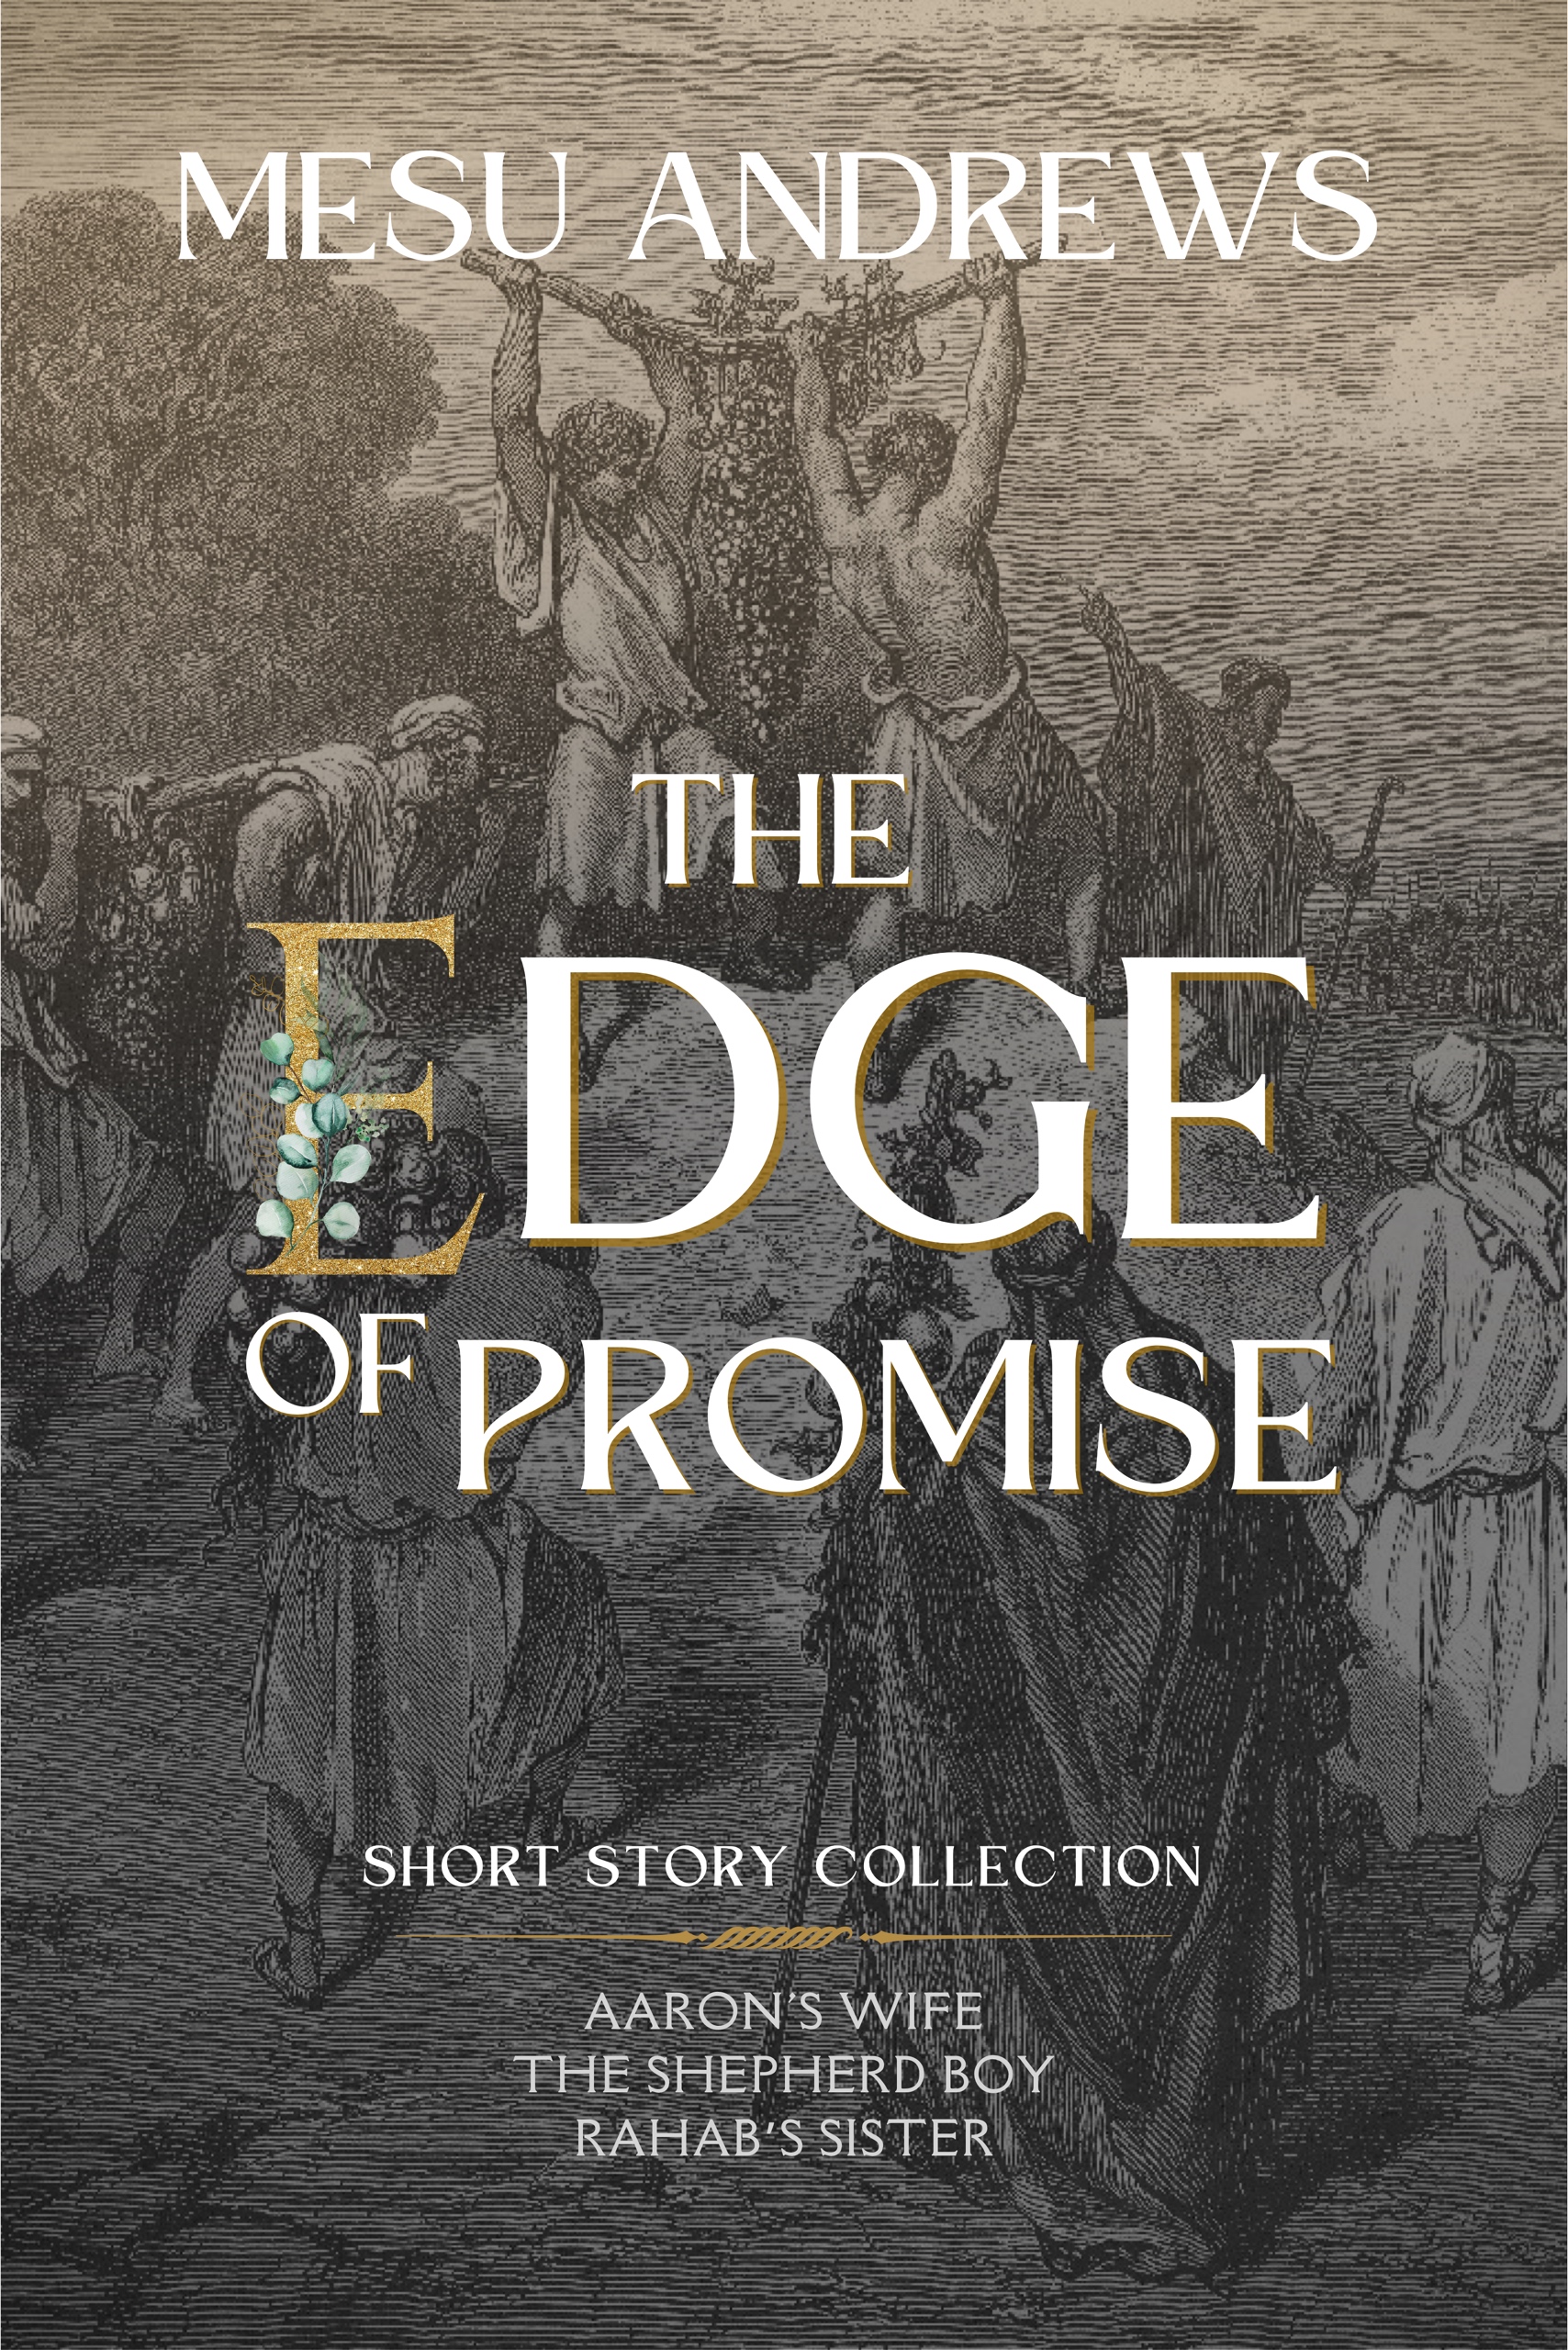 The Edge of Promise